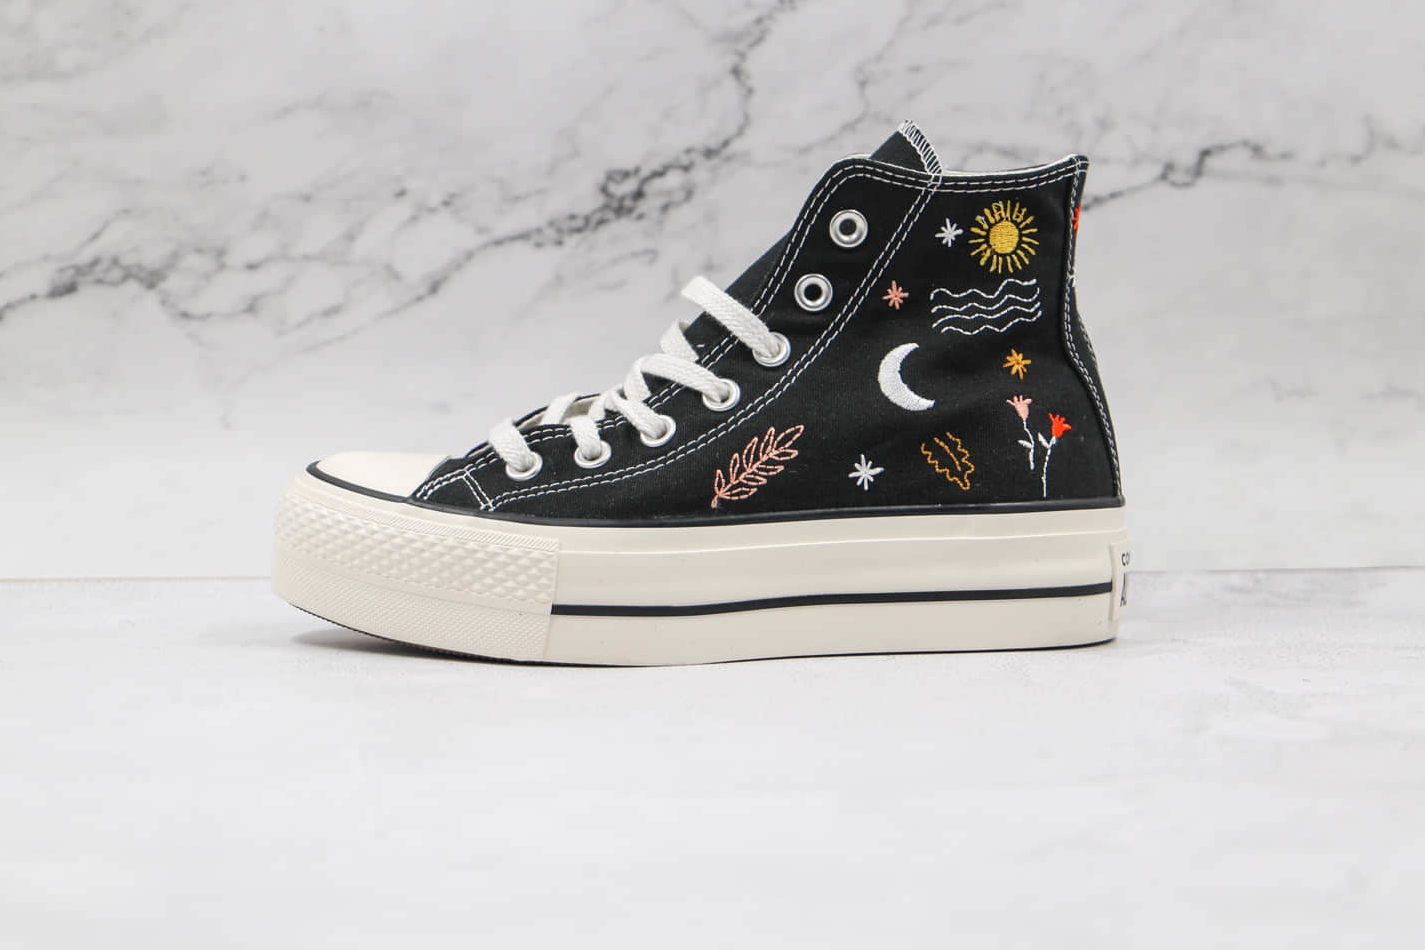 Converse Chuck Taylor All Star For Black 571085C - Stylish and Versatile Sneakers